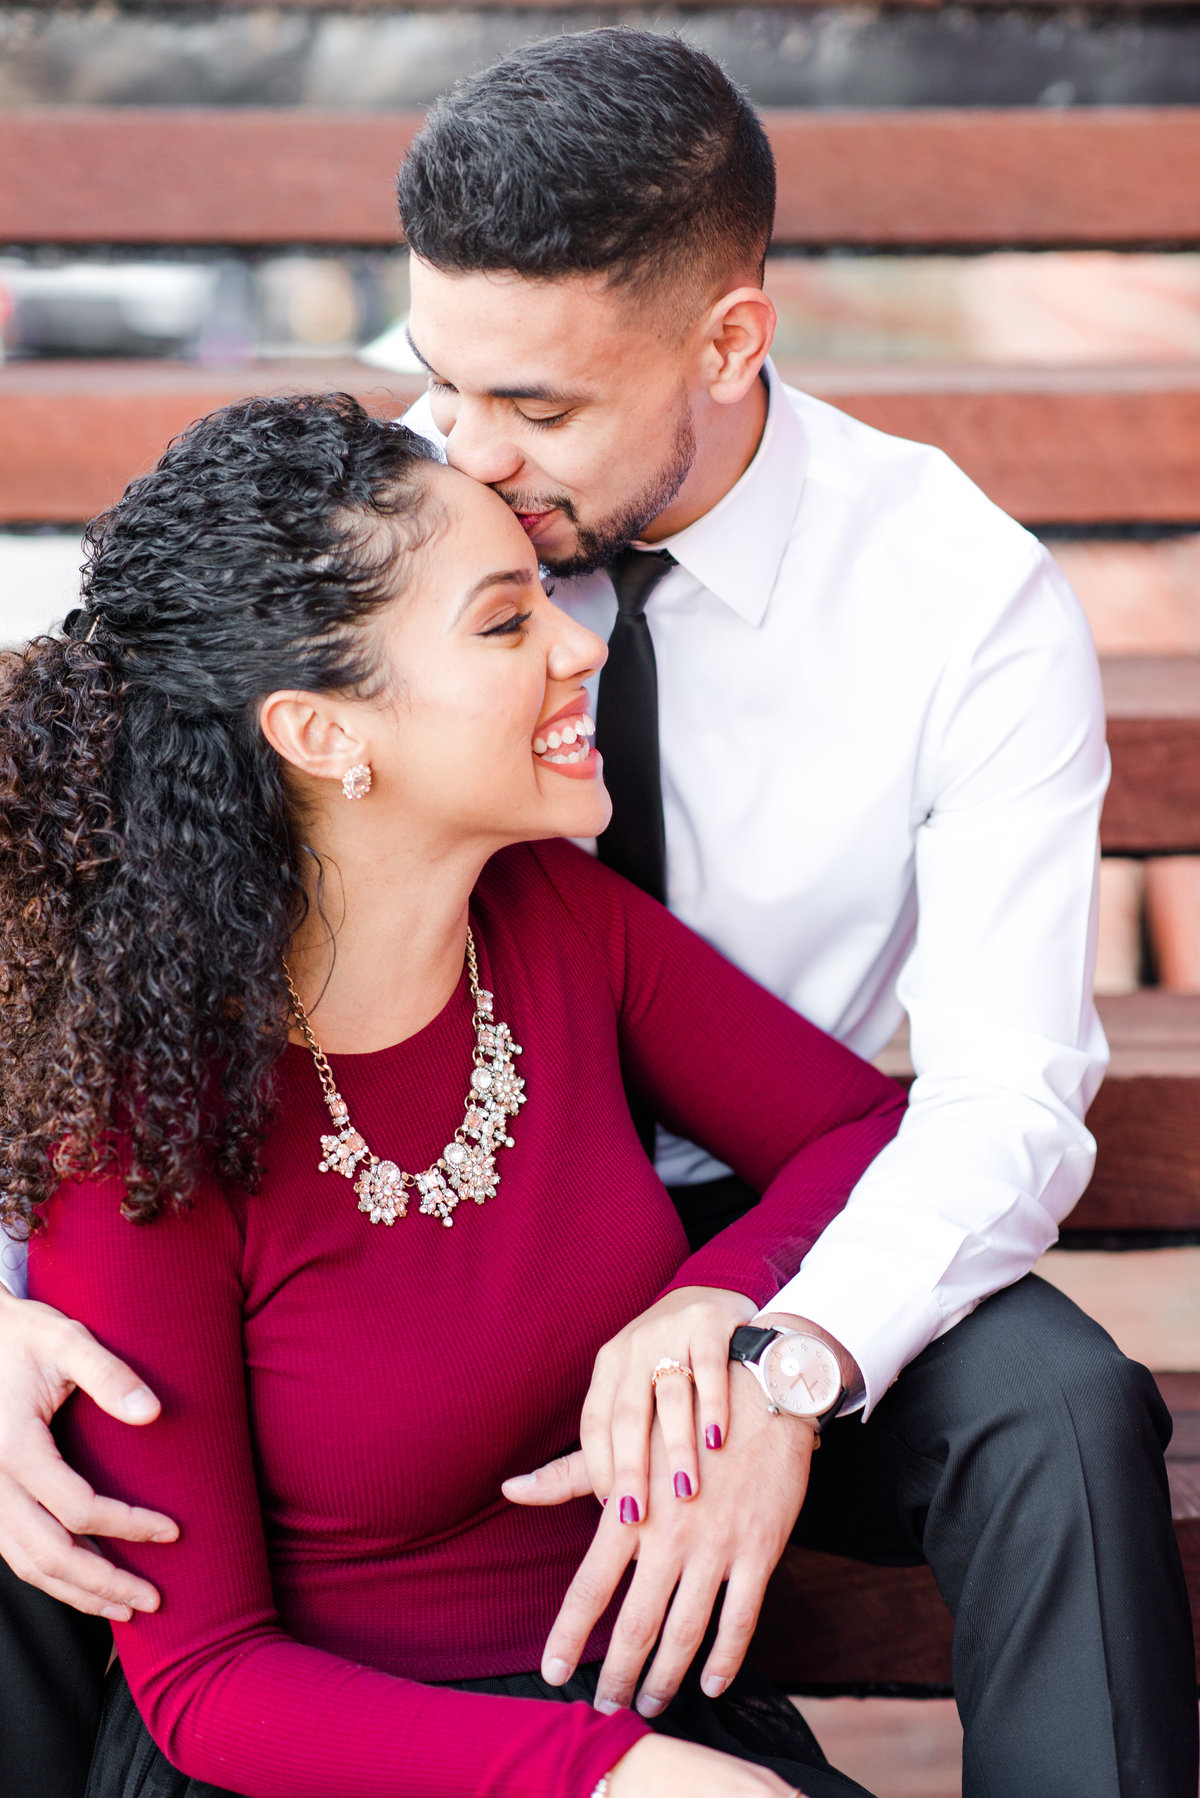 5-reasons-for-an-engagement-session-0001